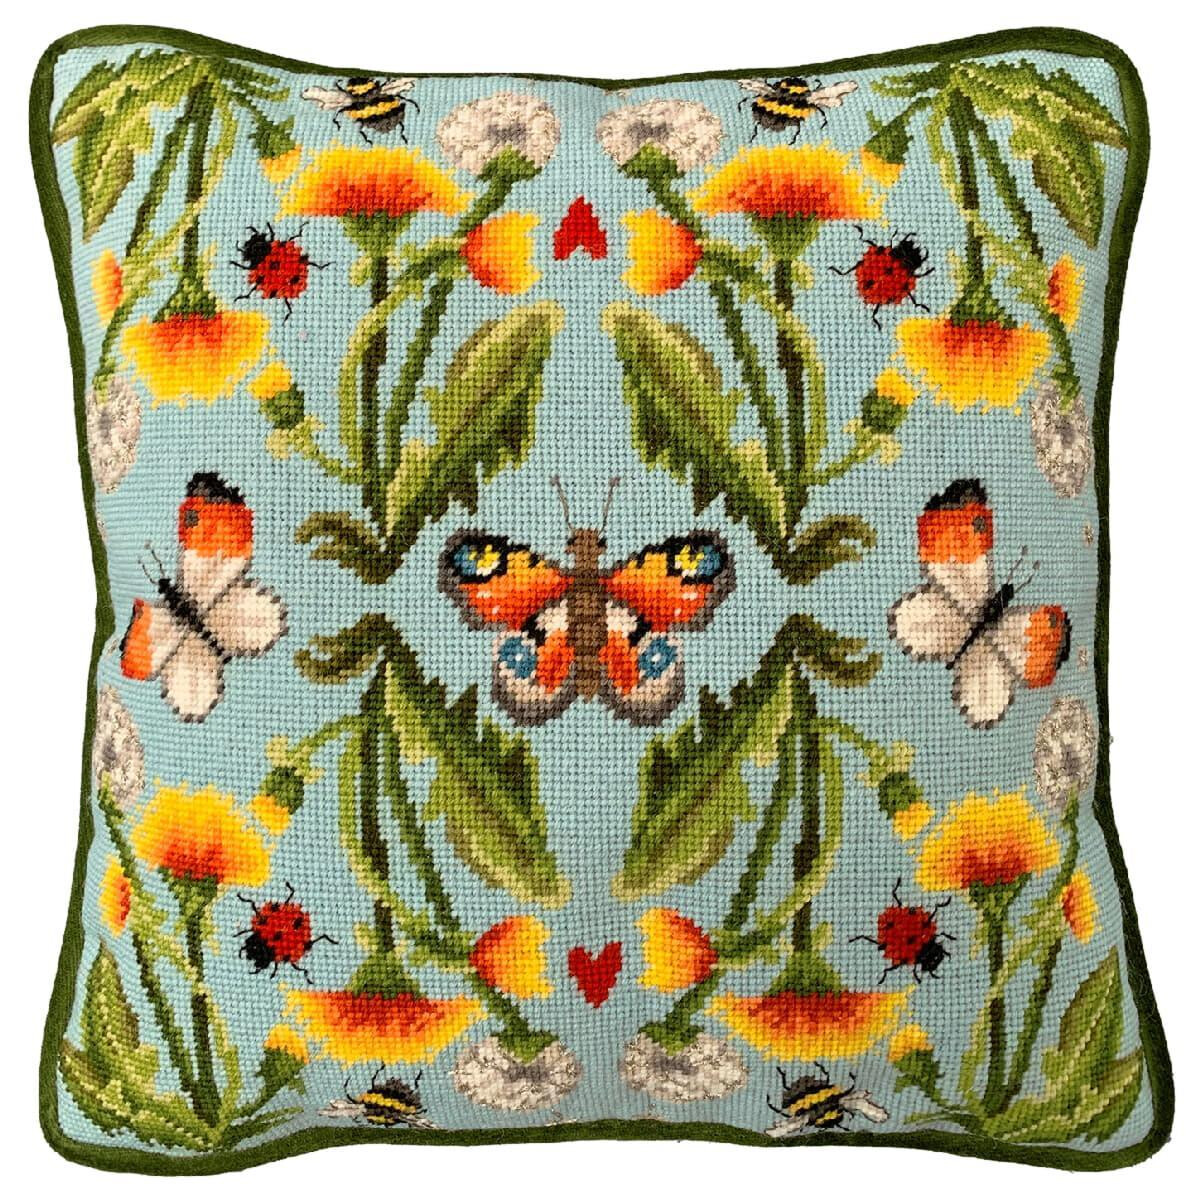 A colorful embroidered pillow in embroidery pack from...